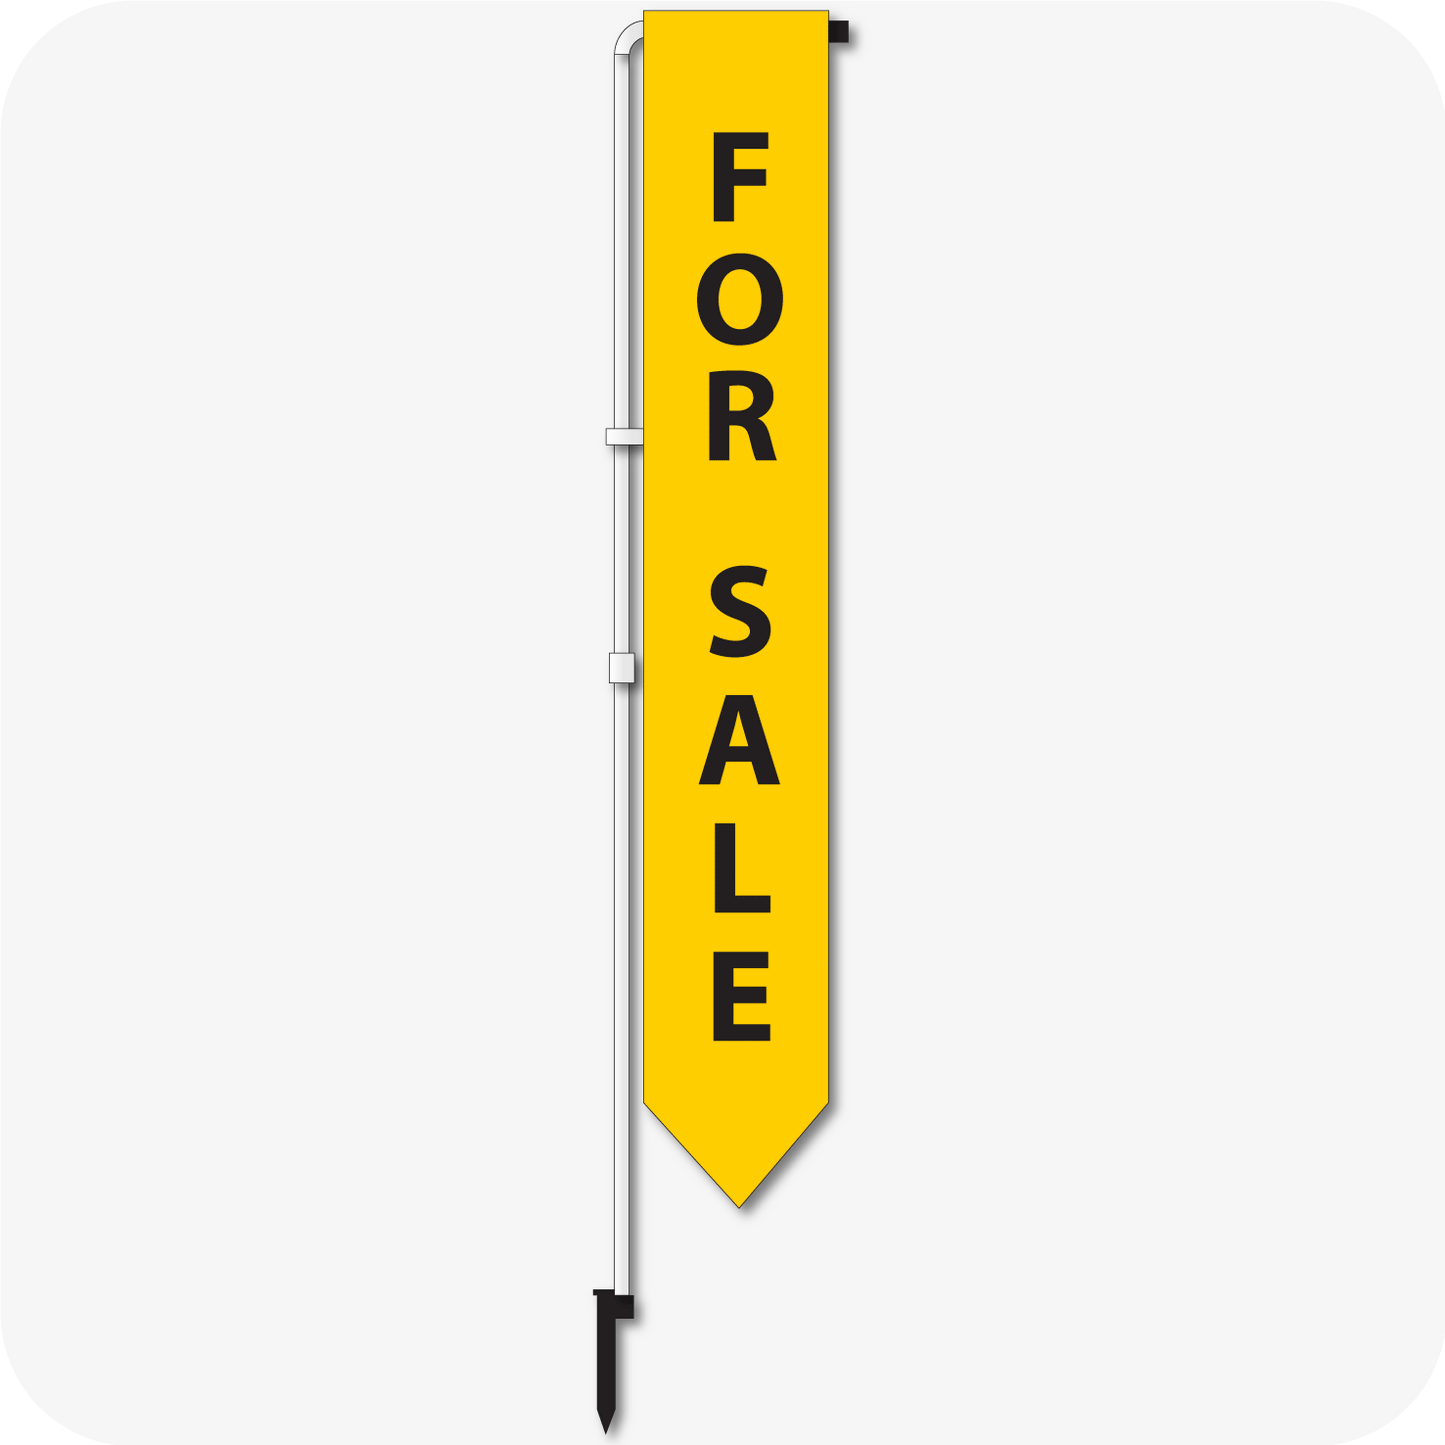 For Sale Yard Marker Yellow - FLAG ONLY!